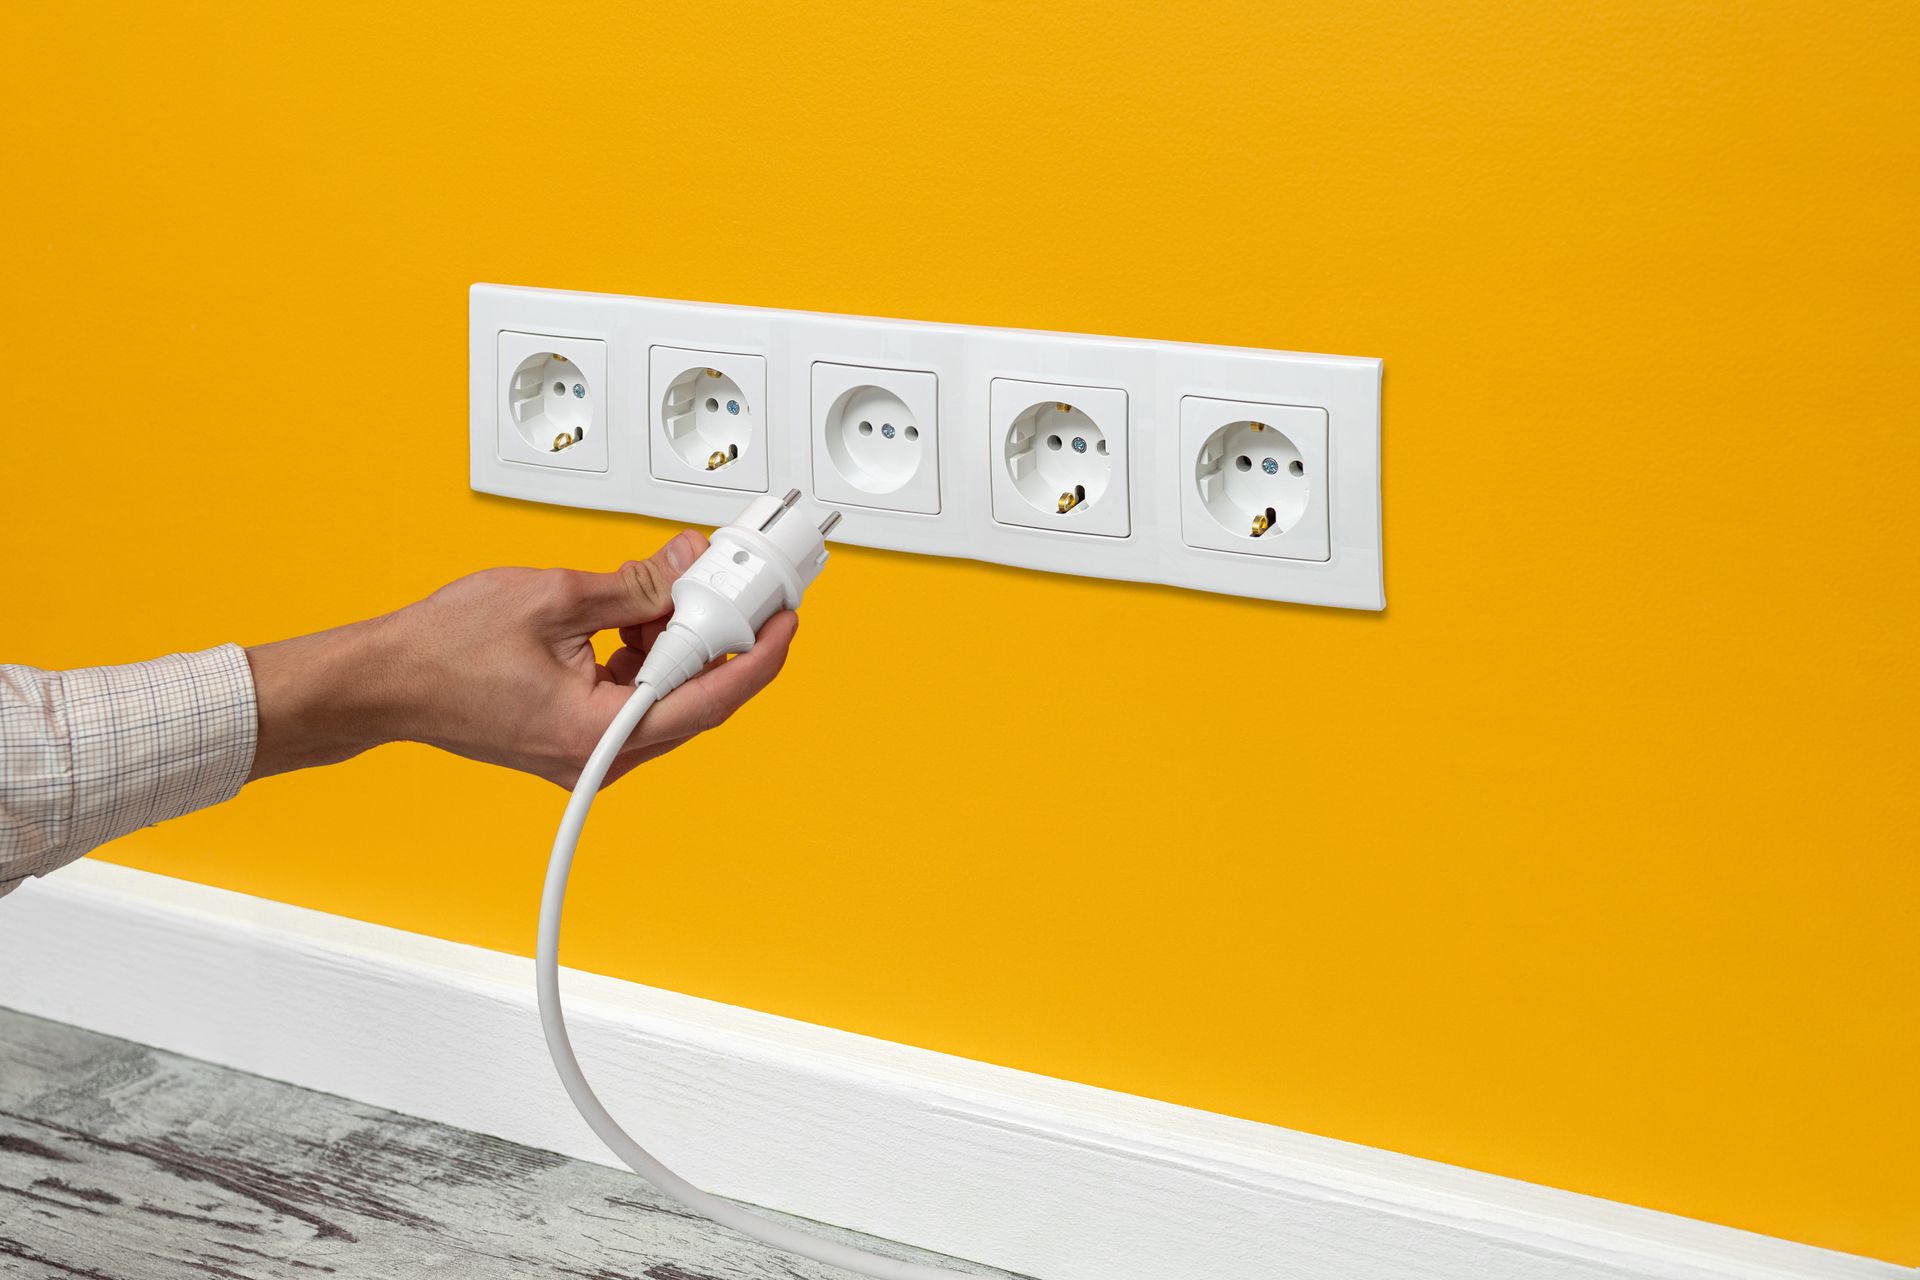 a person is plugging a cord into an electrical outlet on a yellow wall .